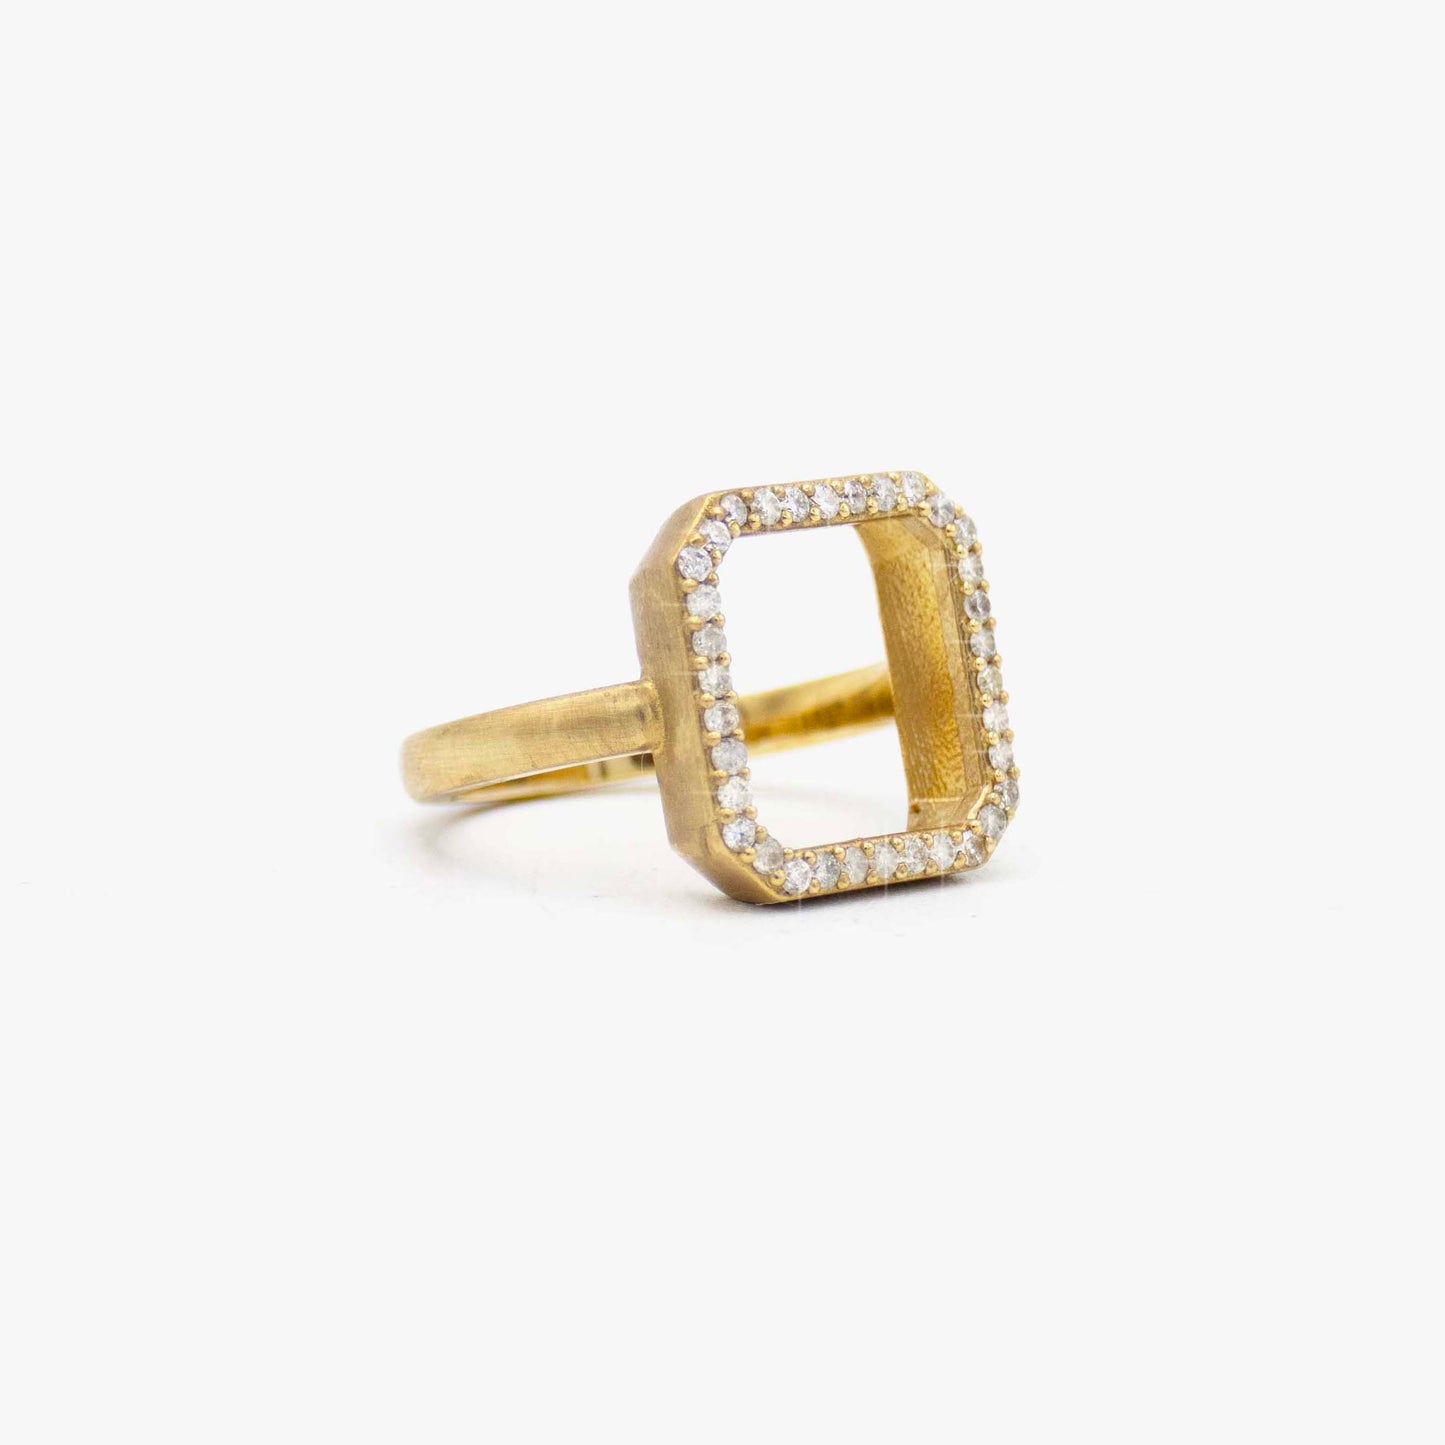 10K Gold Square and Diamond Ring